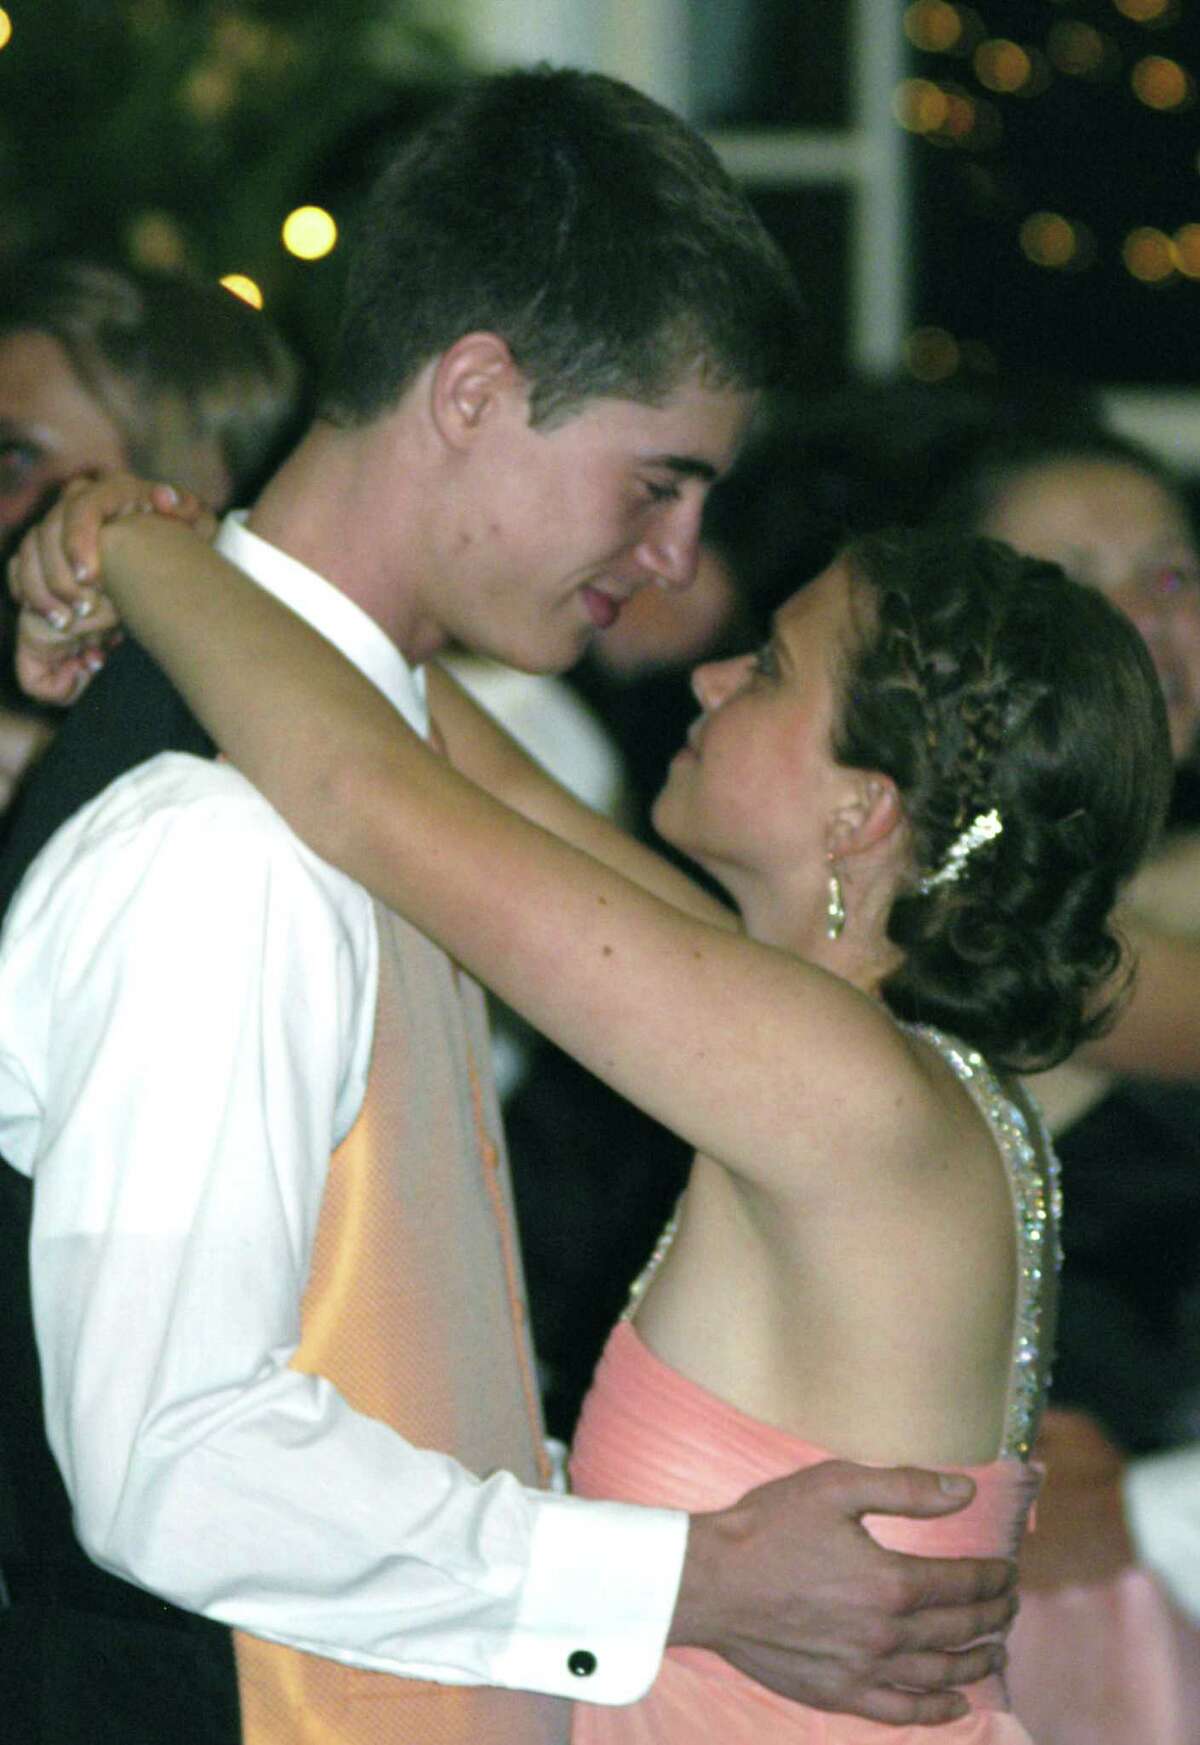 Krista Pullen and Thomas Barkal share a romantic dance Friday, May 3 at the Riverview in Monroe during the New Milford High School Senior Prom. The two NMHS seniors were among nearly 400 students and school staff on hand to enjoy the evening's dining, dancing and special prom ambience to the theme "Under The Sea." For more photos, see the May 17 Spectrum and visit www.newmilfordspectrum.com. NMHS' Junior Prom will be held Saturday, May 11 at the Amber Room Colonnade in Danbury.